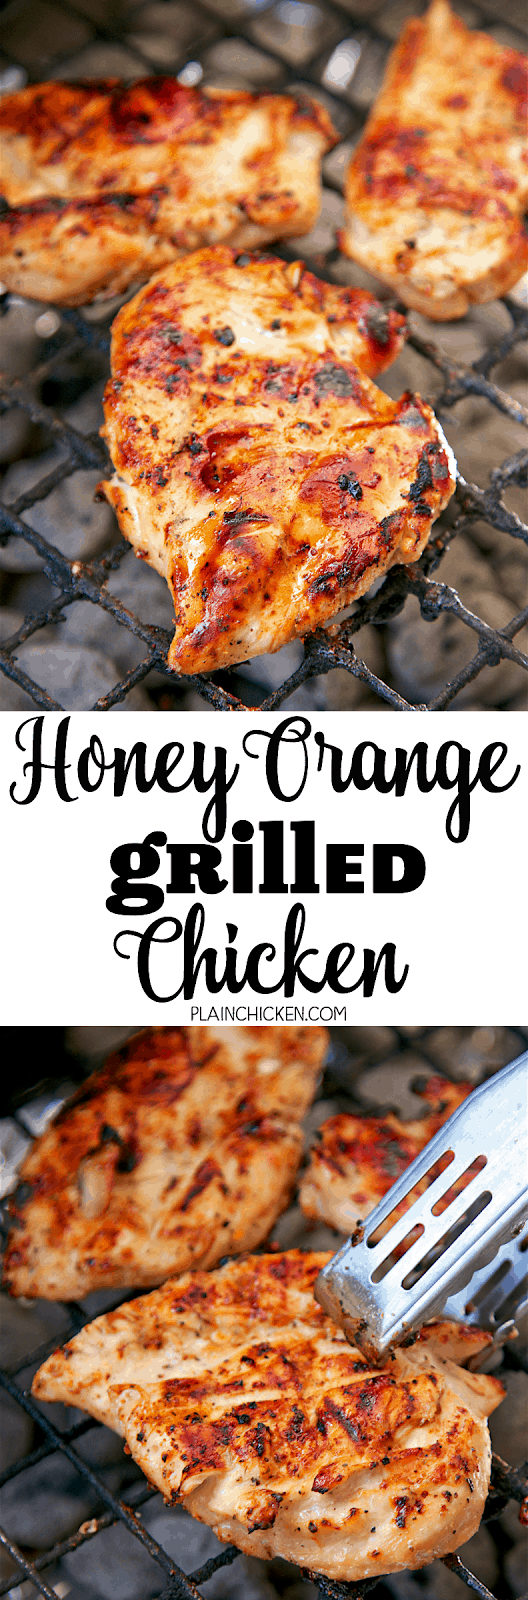 Honey Orange Grilled Chicken - only 4 ingredients! Orange juice, honey, Italian dressing mix and chicken. Marinate for an hour and grill. SO easy and super delicious! We doubled the recipe and ate leftovers the next day. Crazy good!